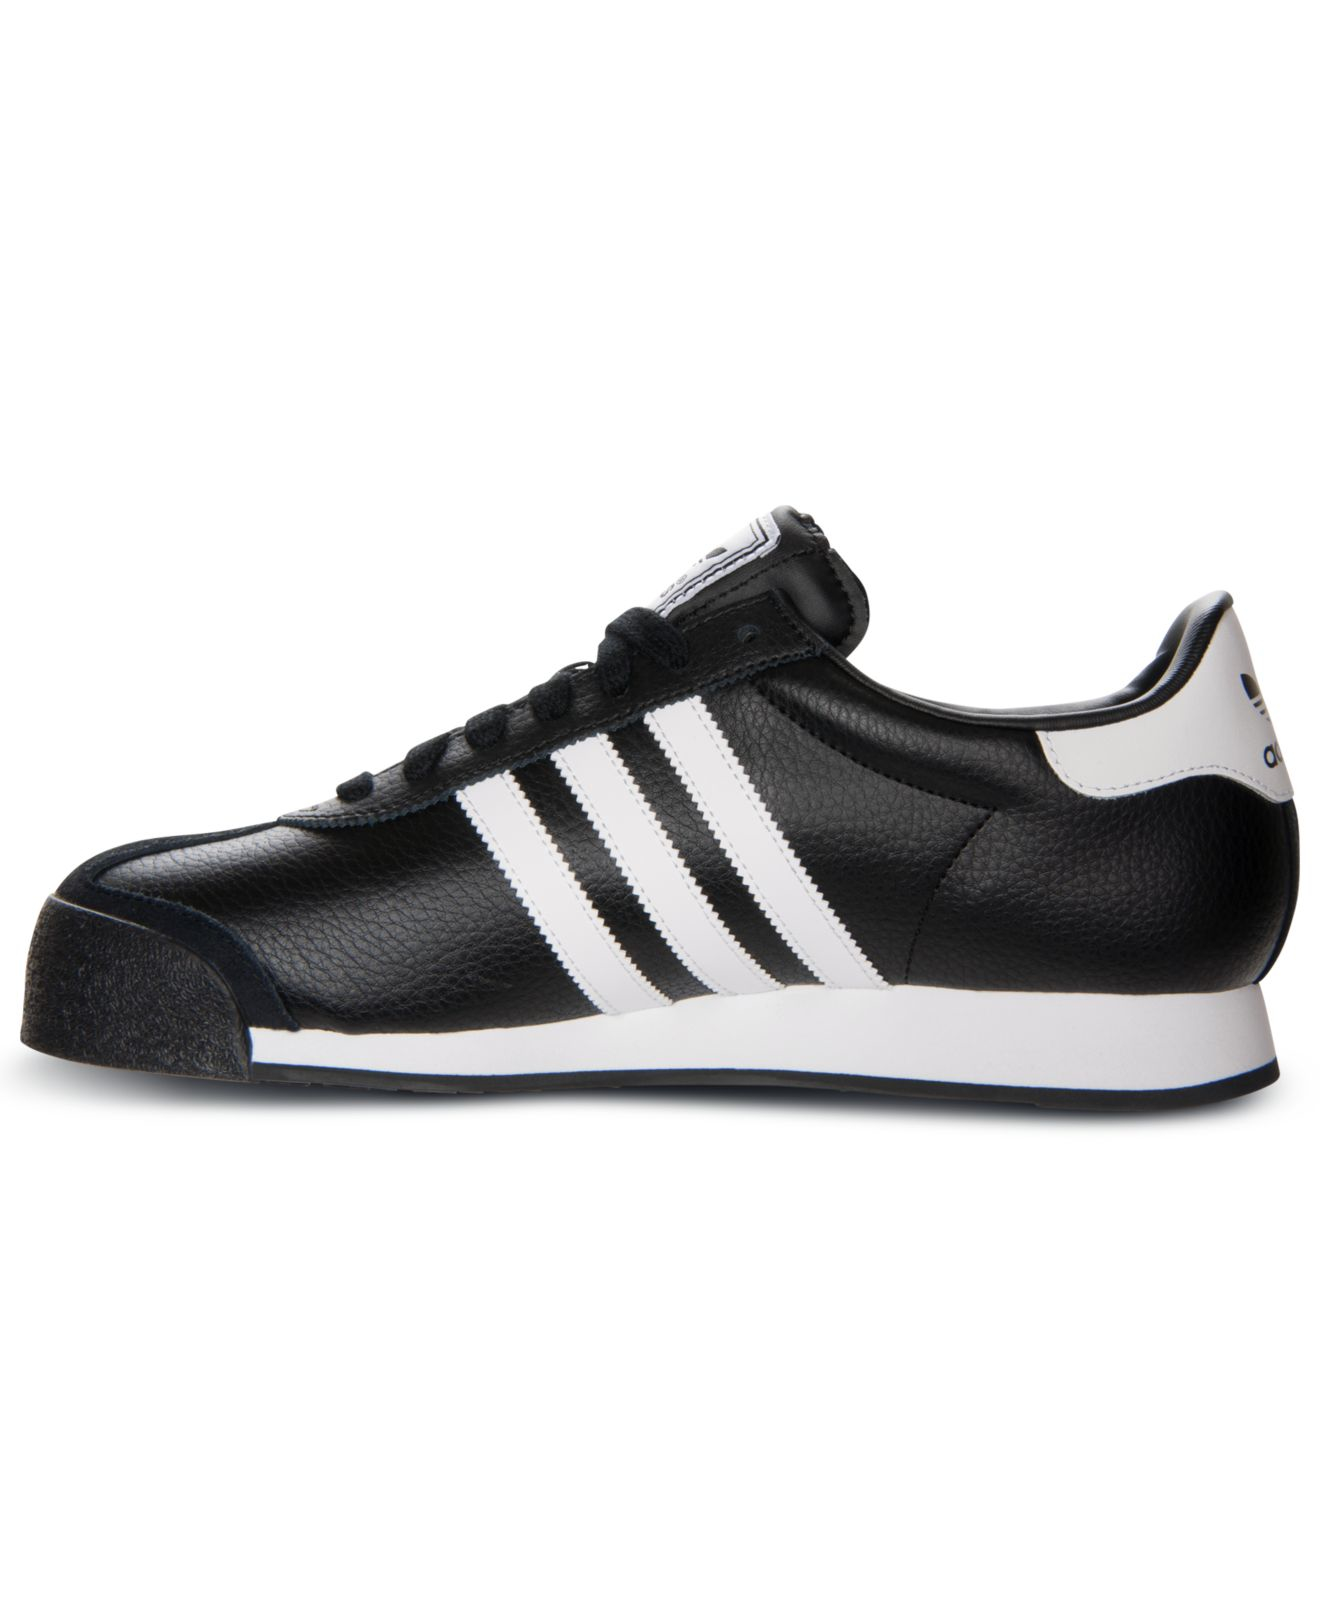 Lyst - Adidas Men's Originals Samoa Casual Sneakers From Finish Line in ...